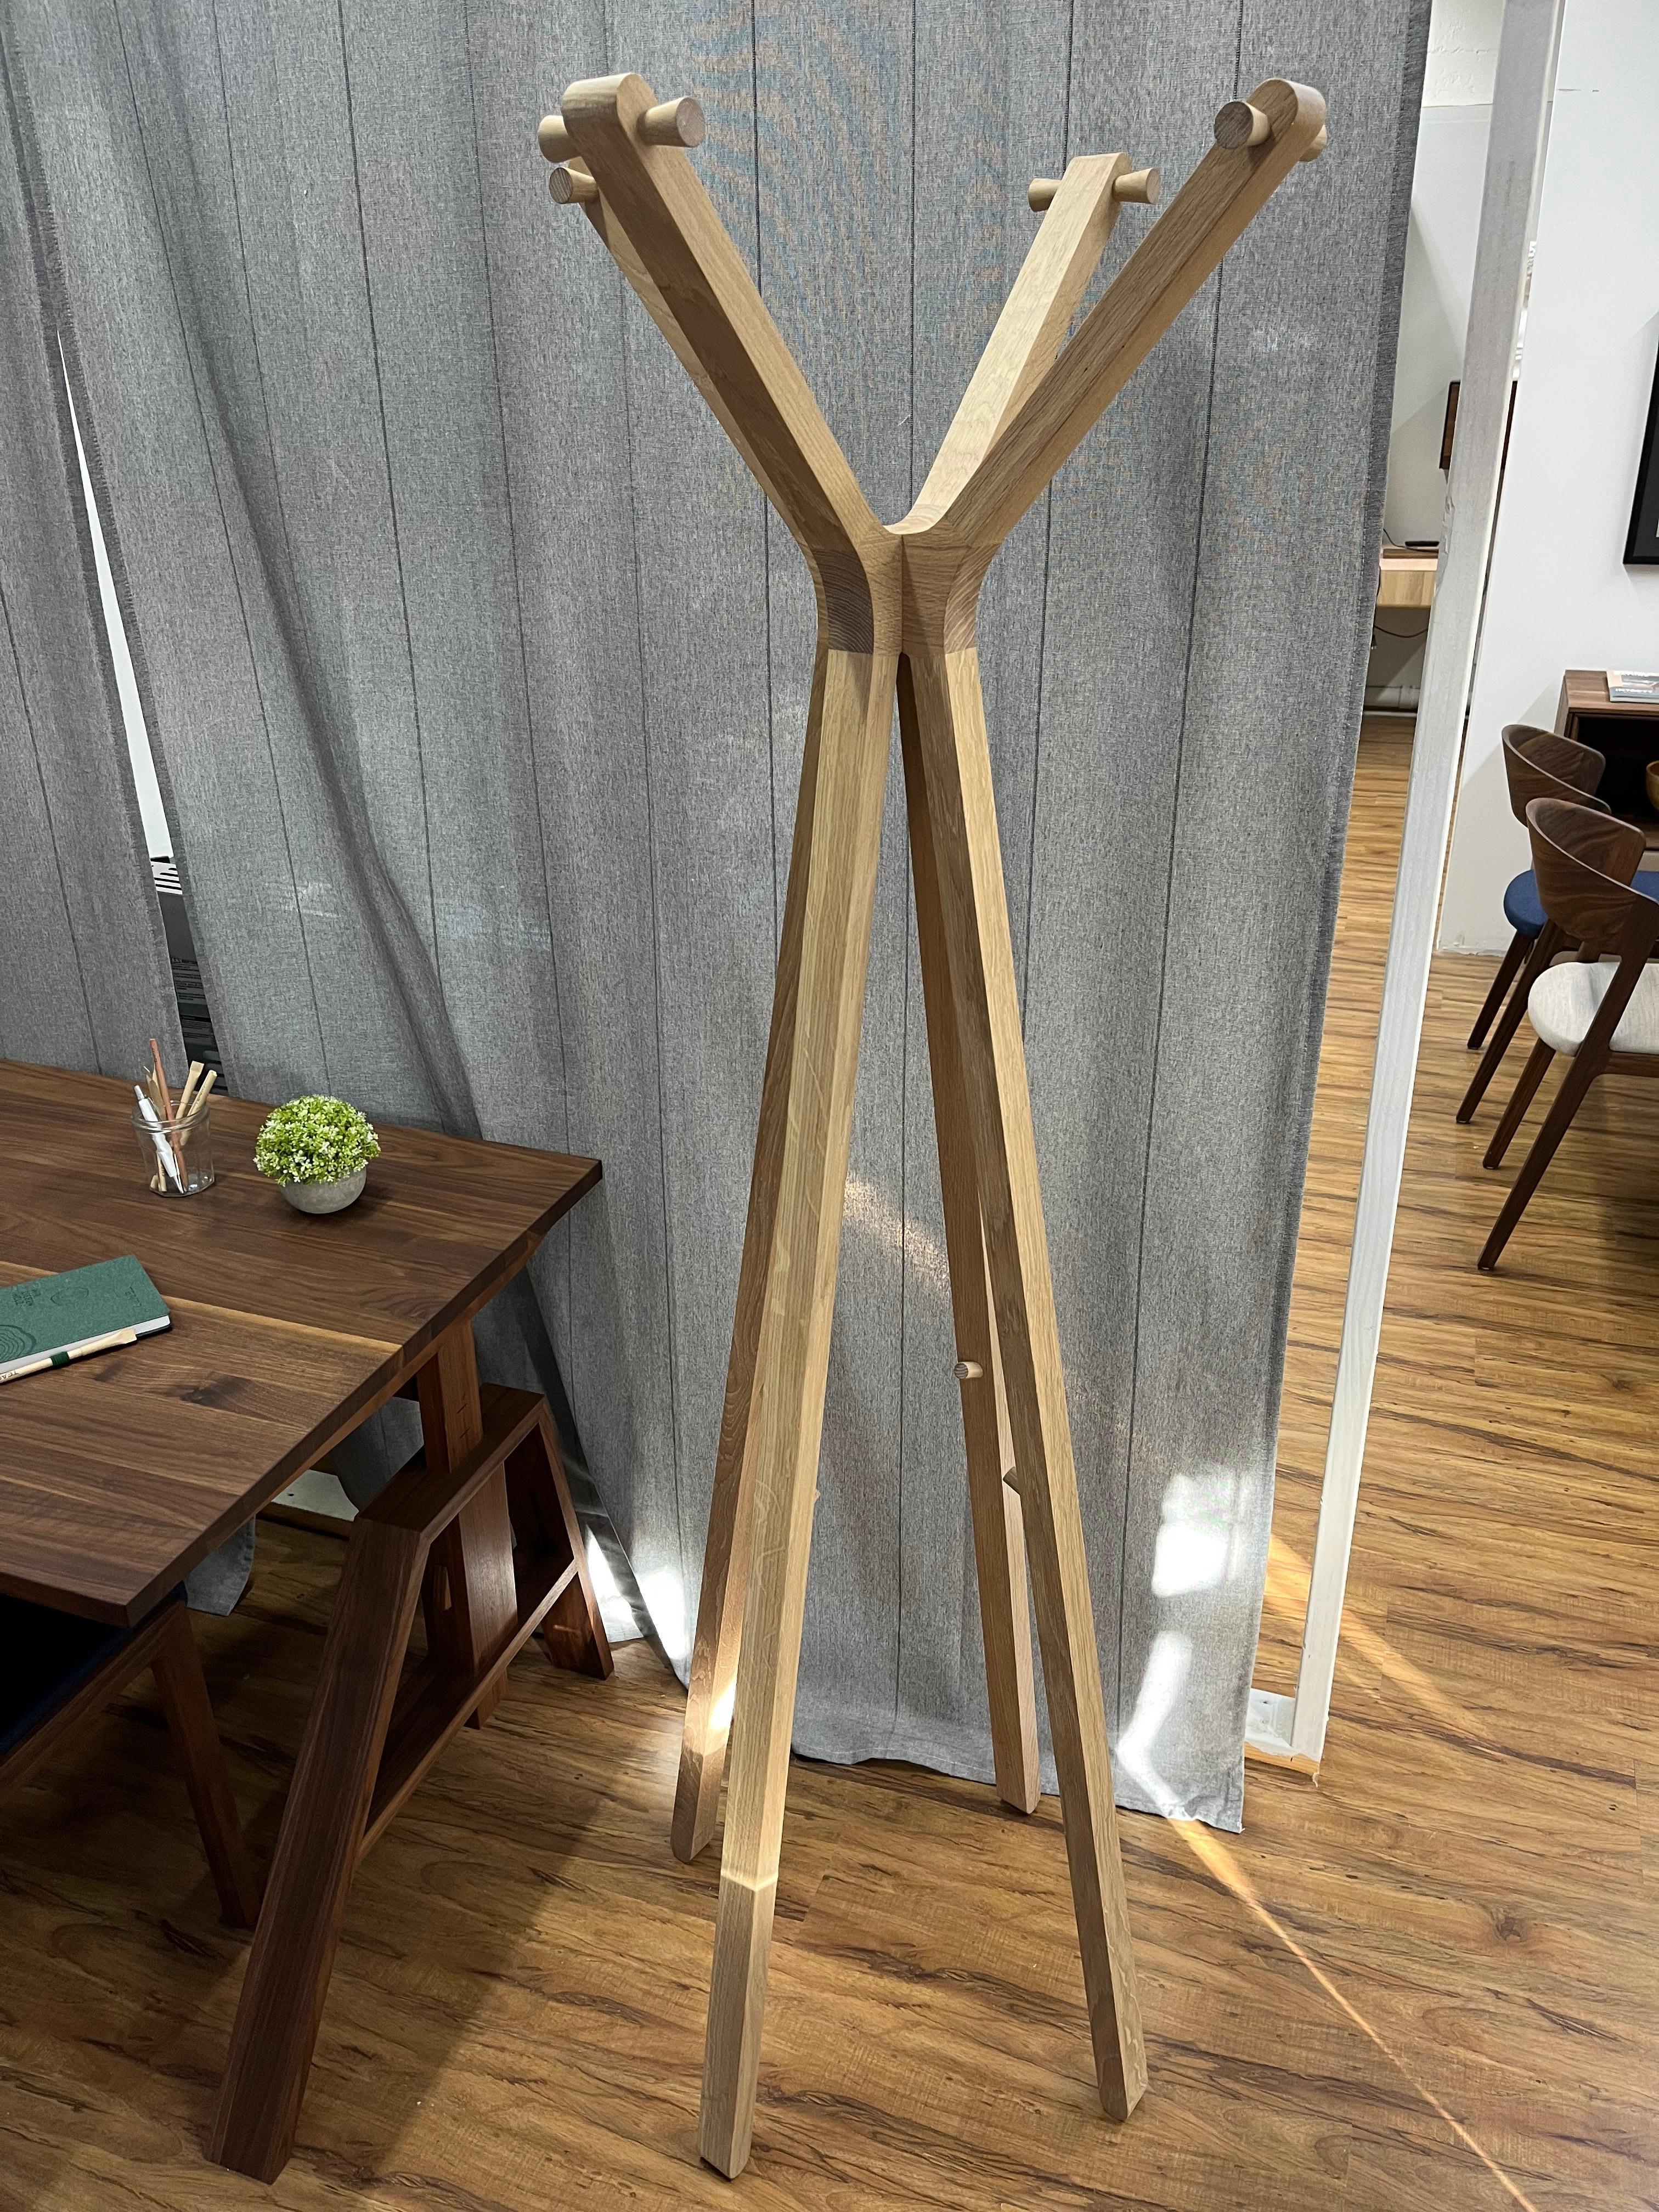 The craftsmanship of this solid wood coat tree sets it apart from all other designs. The slender solid wood frame and the interplay of angular and rounded shapes makes this coat rack a versatile piece designed for an entry hall. While this coat rack